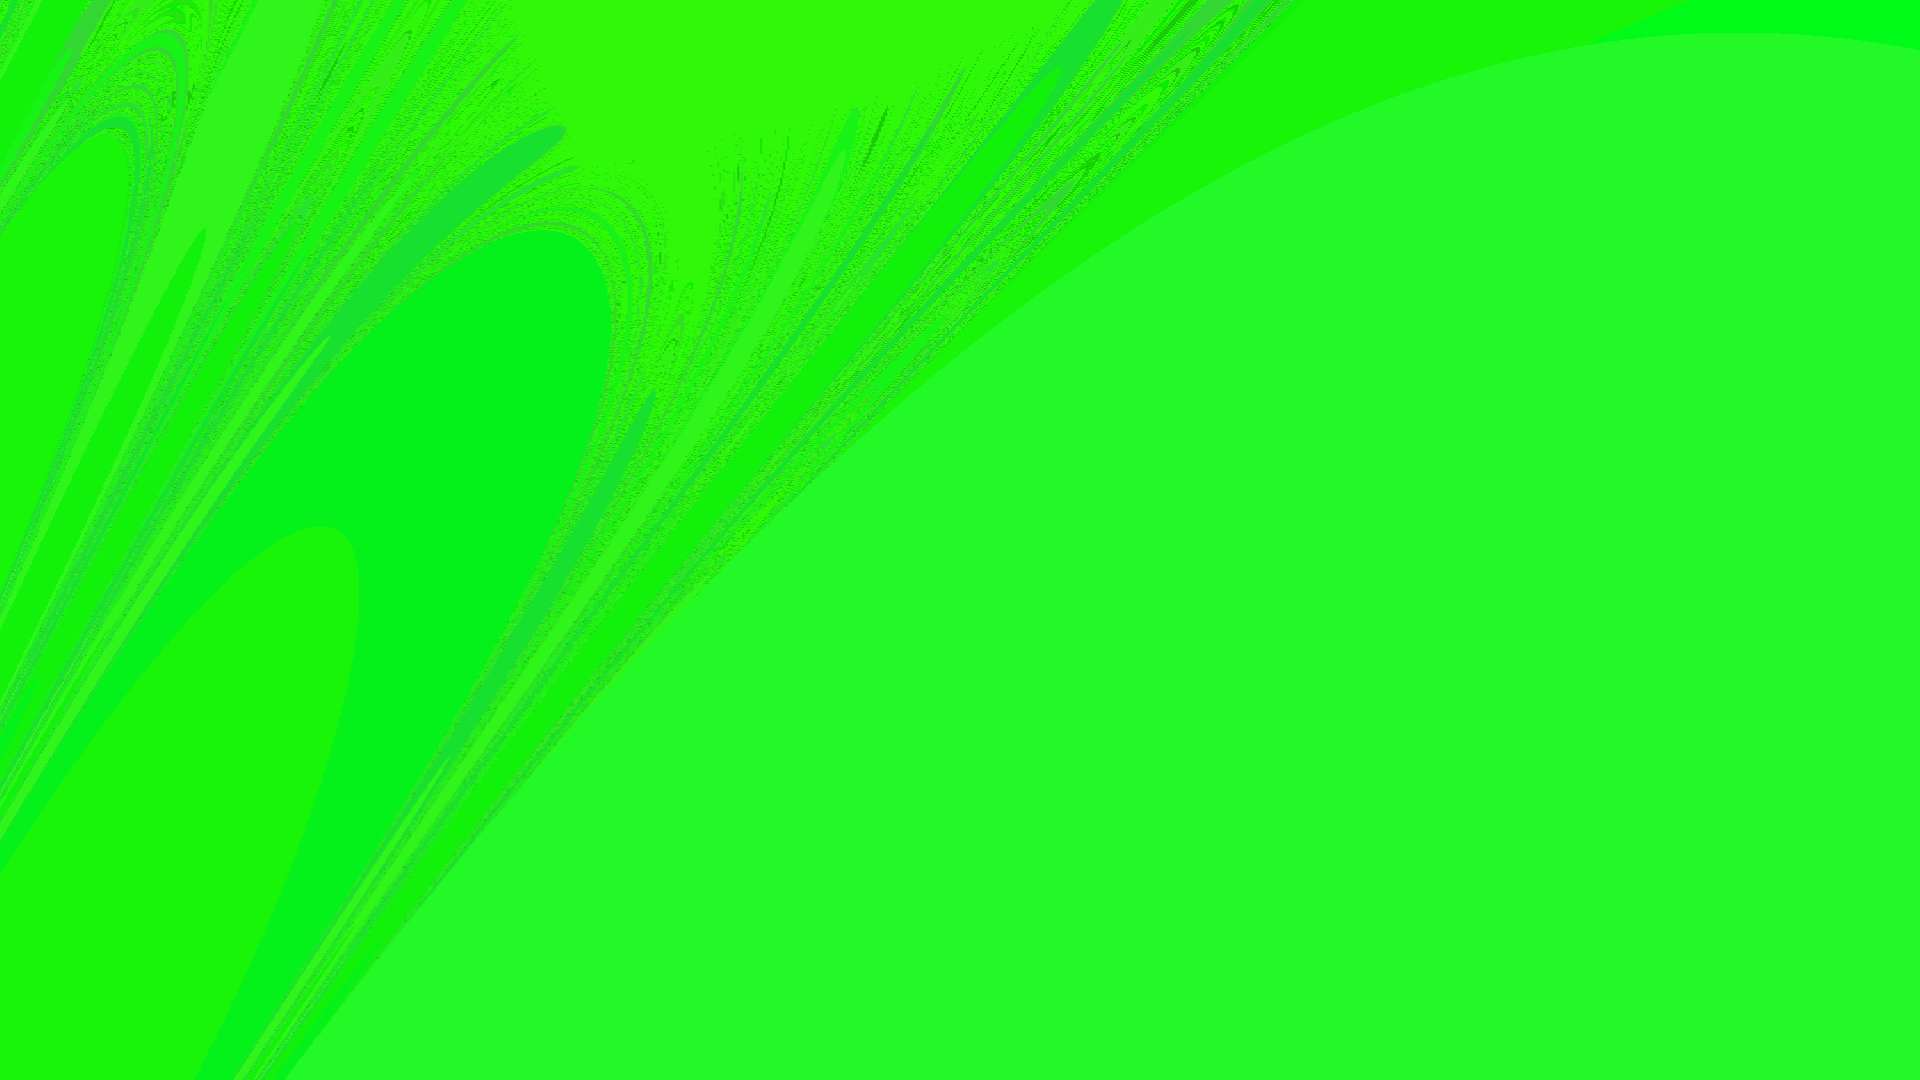 Green Texture Background Image